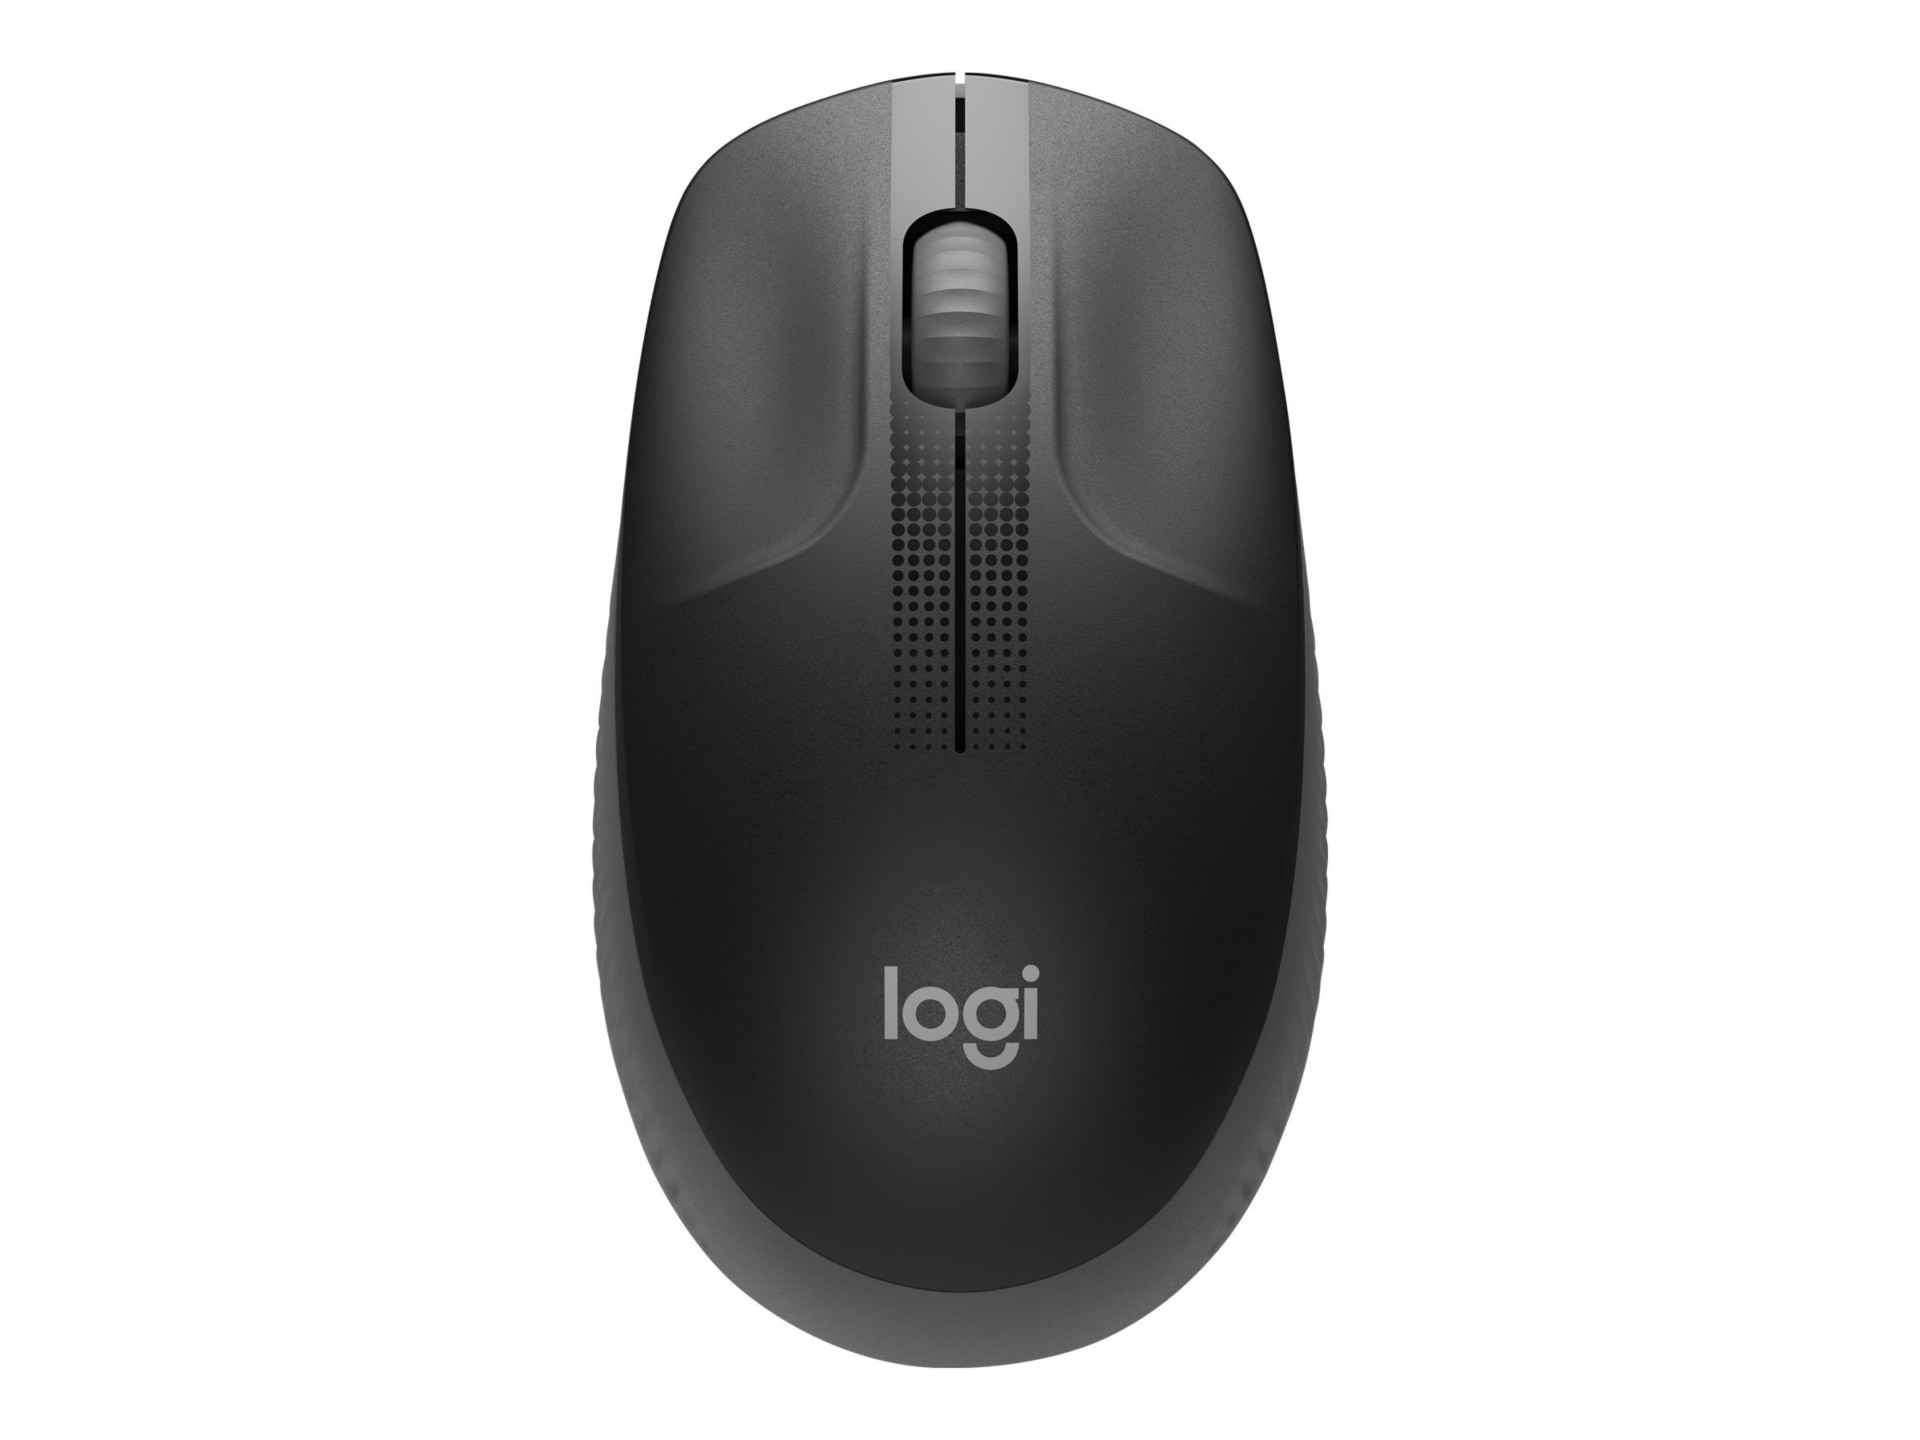 Affordable Logitech M190 Wireless Mouse